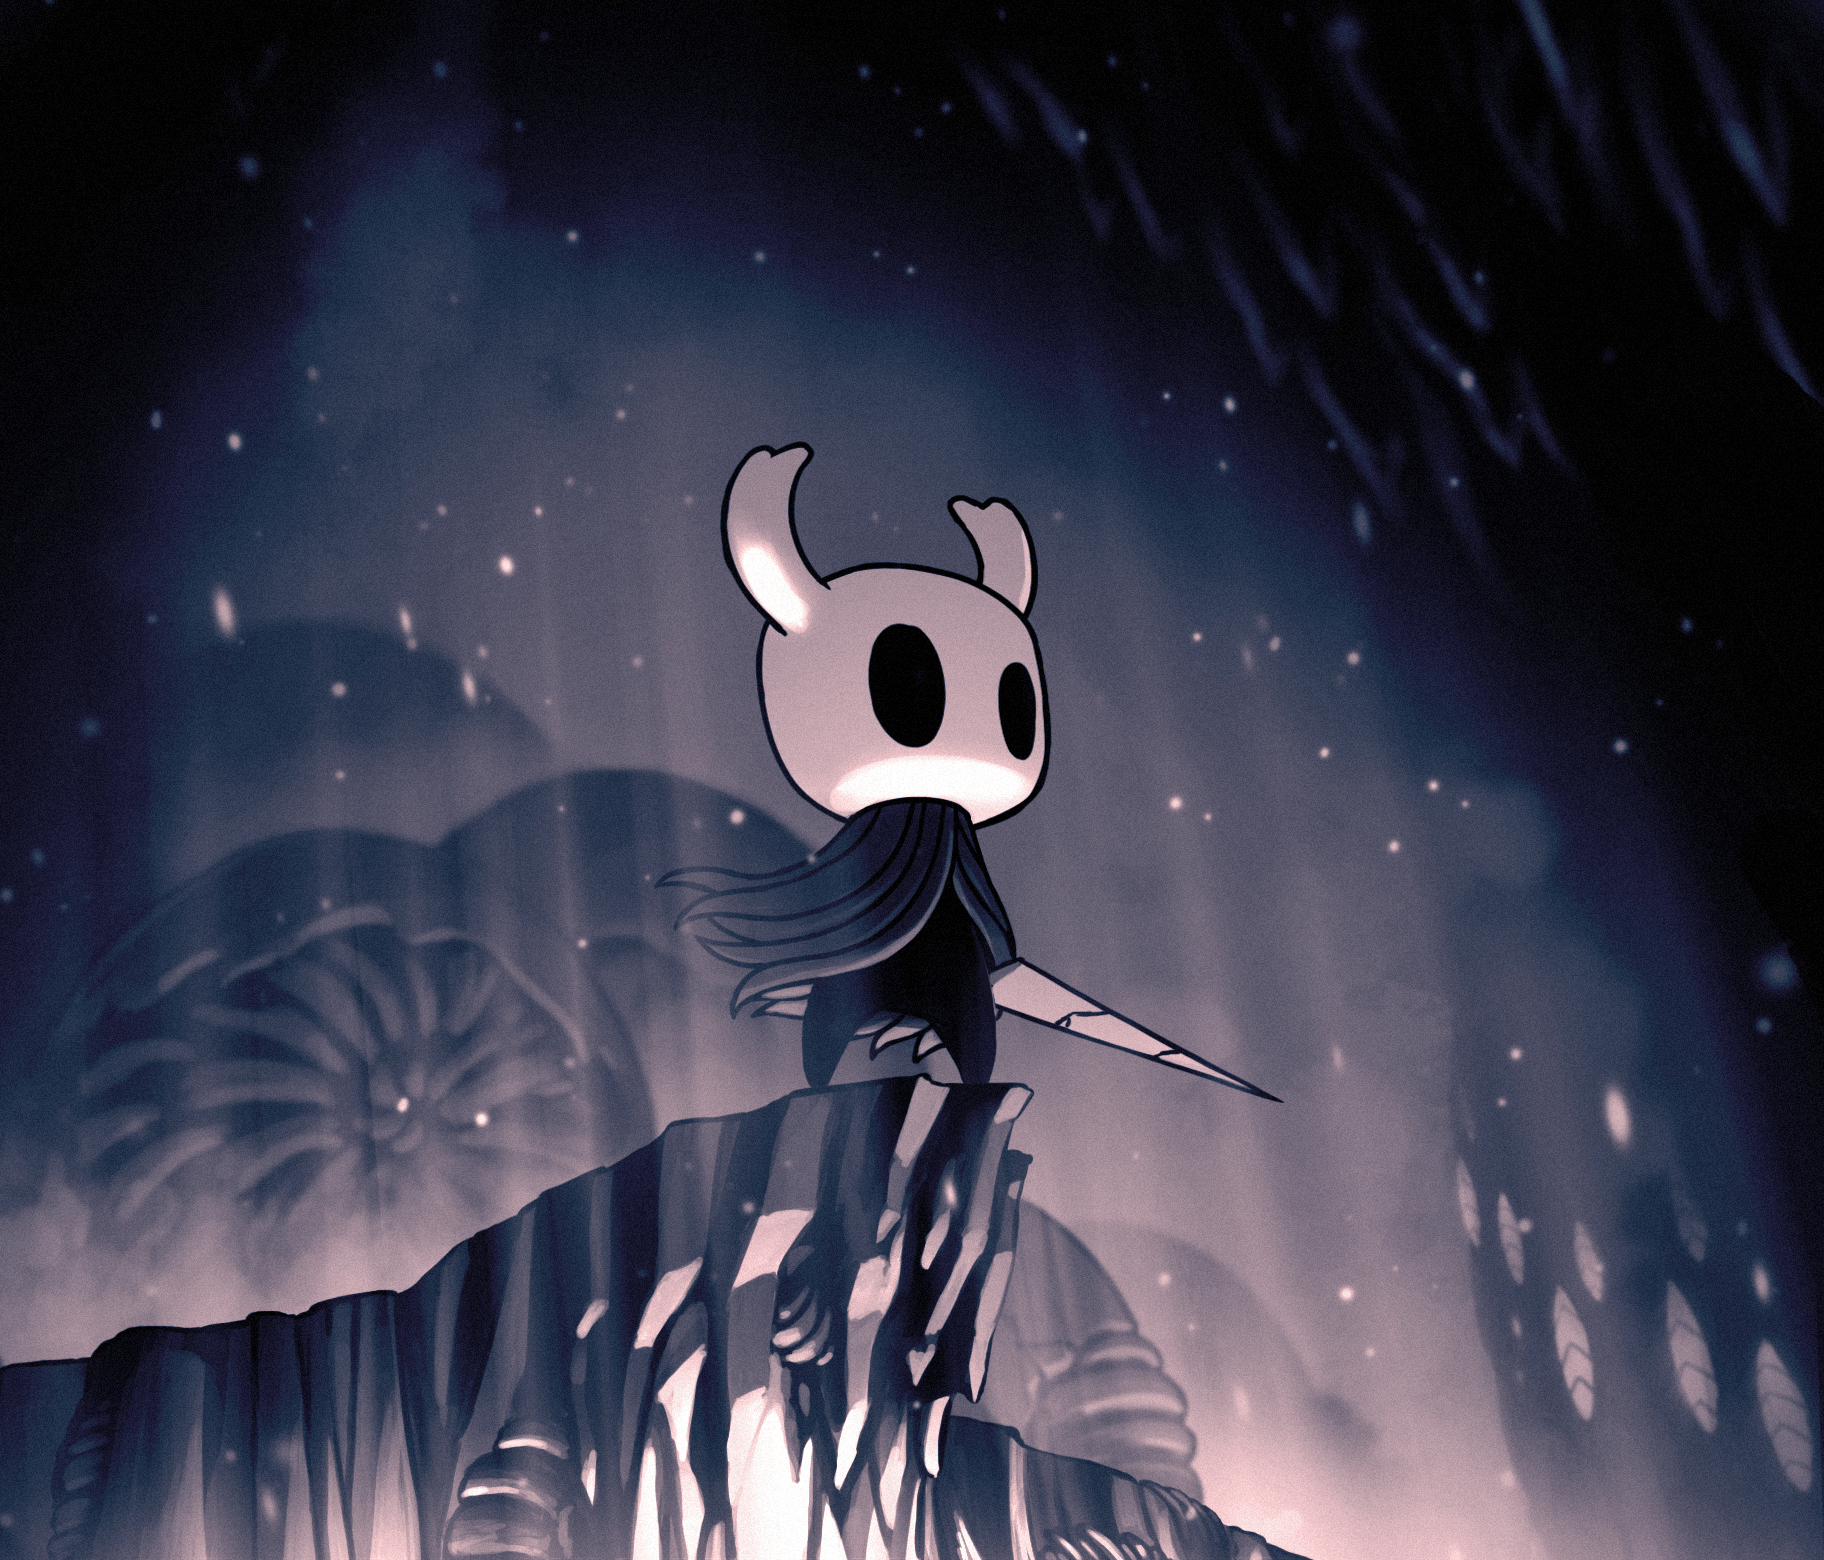 REVIEW: Hollow Knight